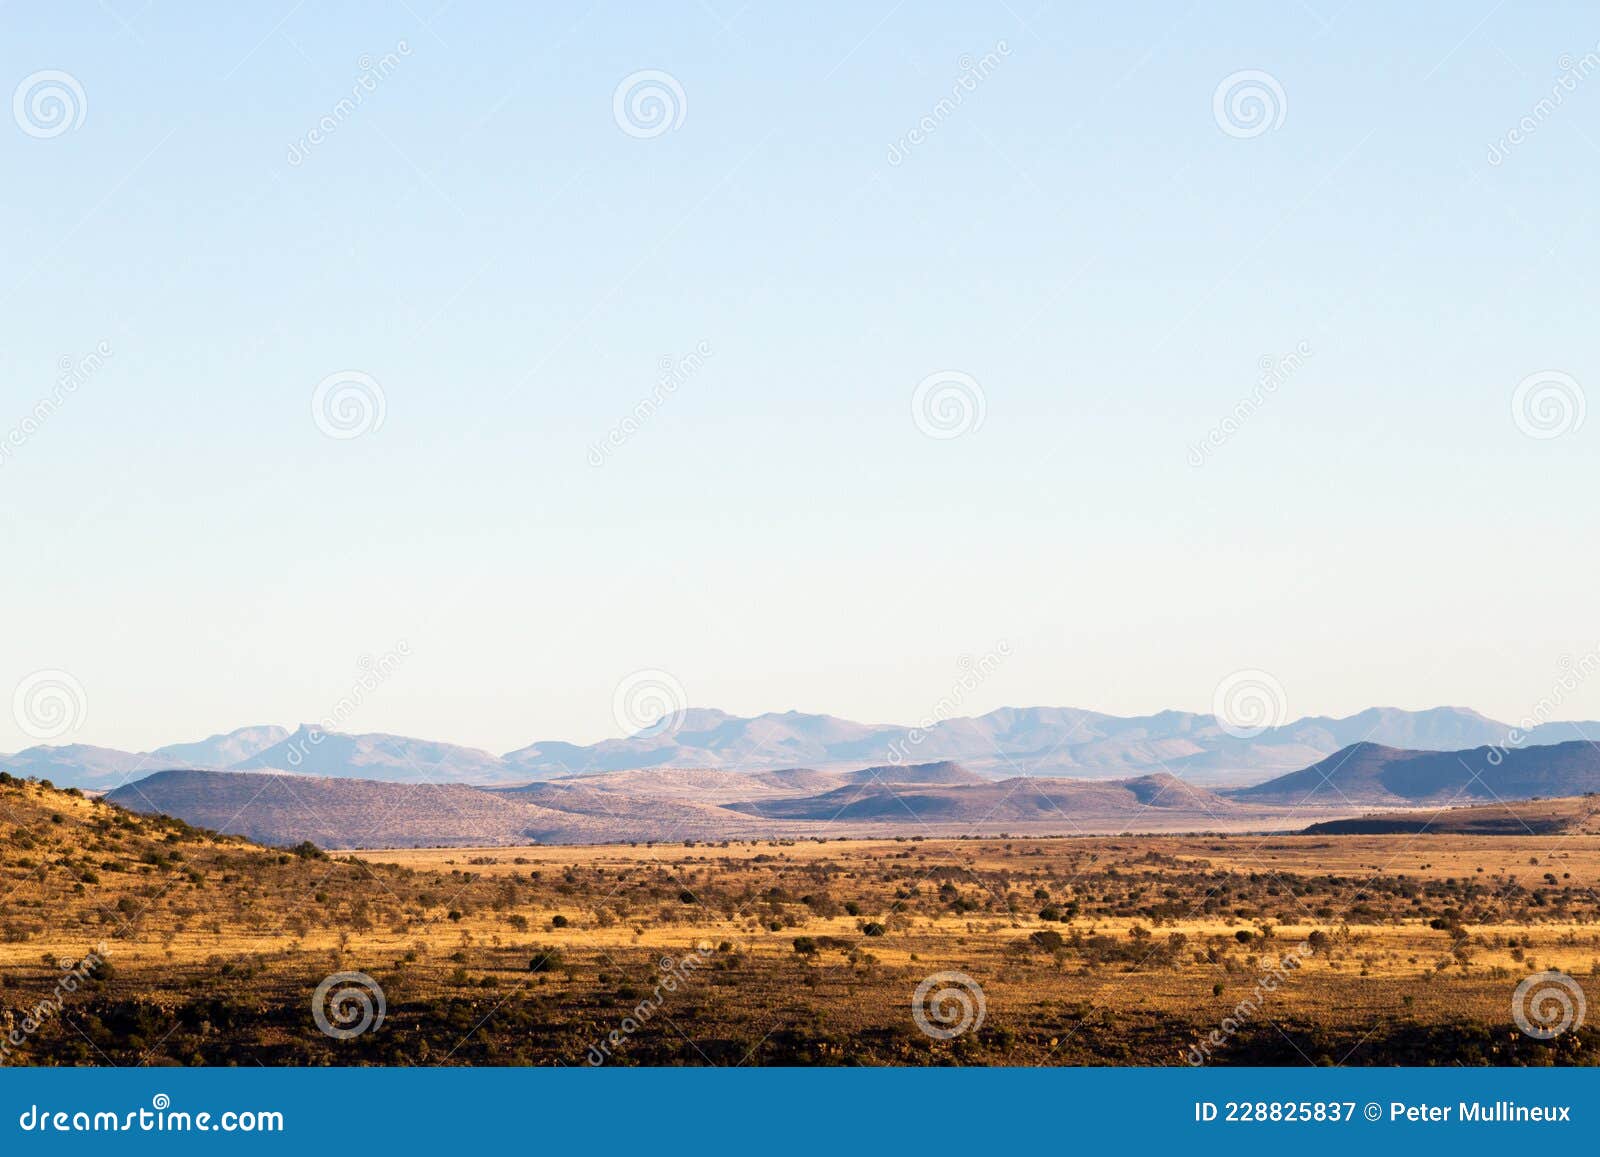 mountain zebra national park, south africa: general view of the scenery giving an idea of the topography and veld type